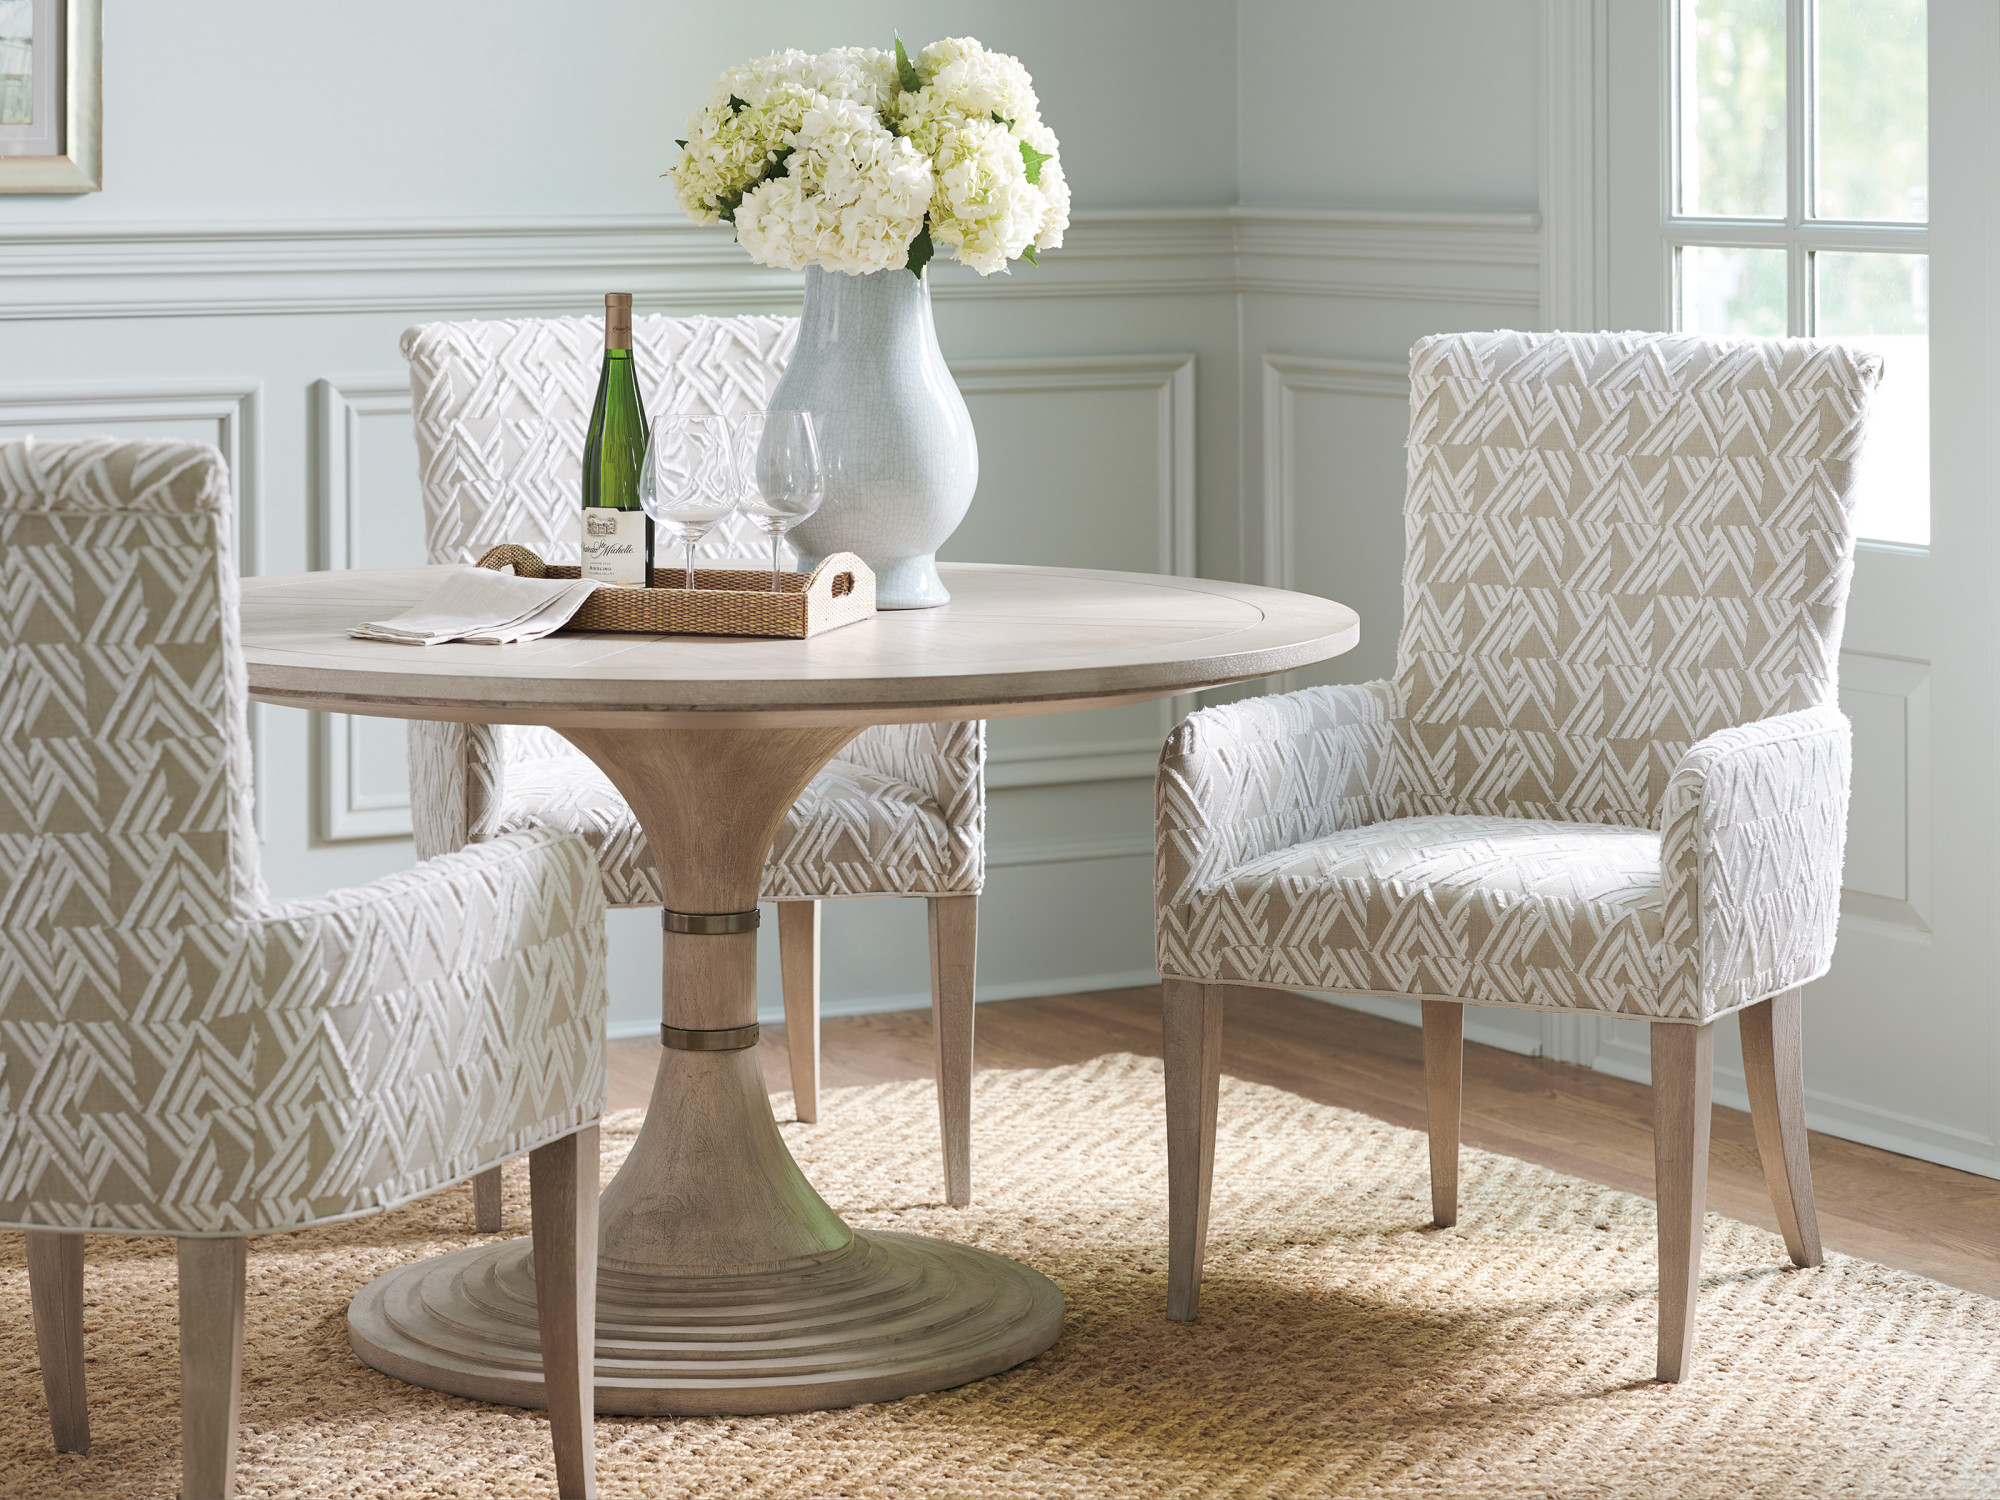 Star Interiors Kickoff: Explore Our High-End Furniture Collections